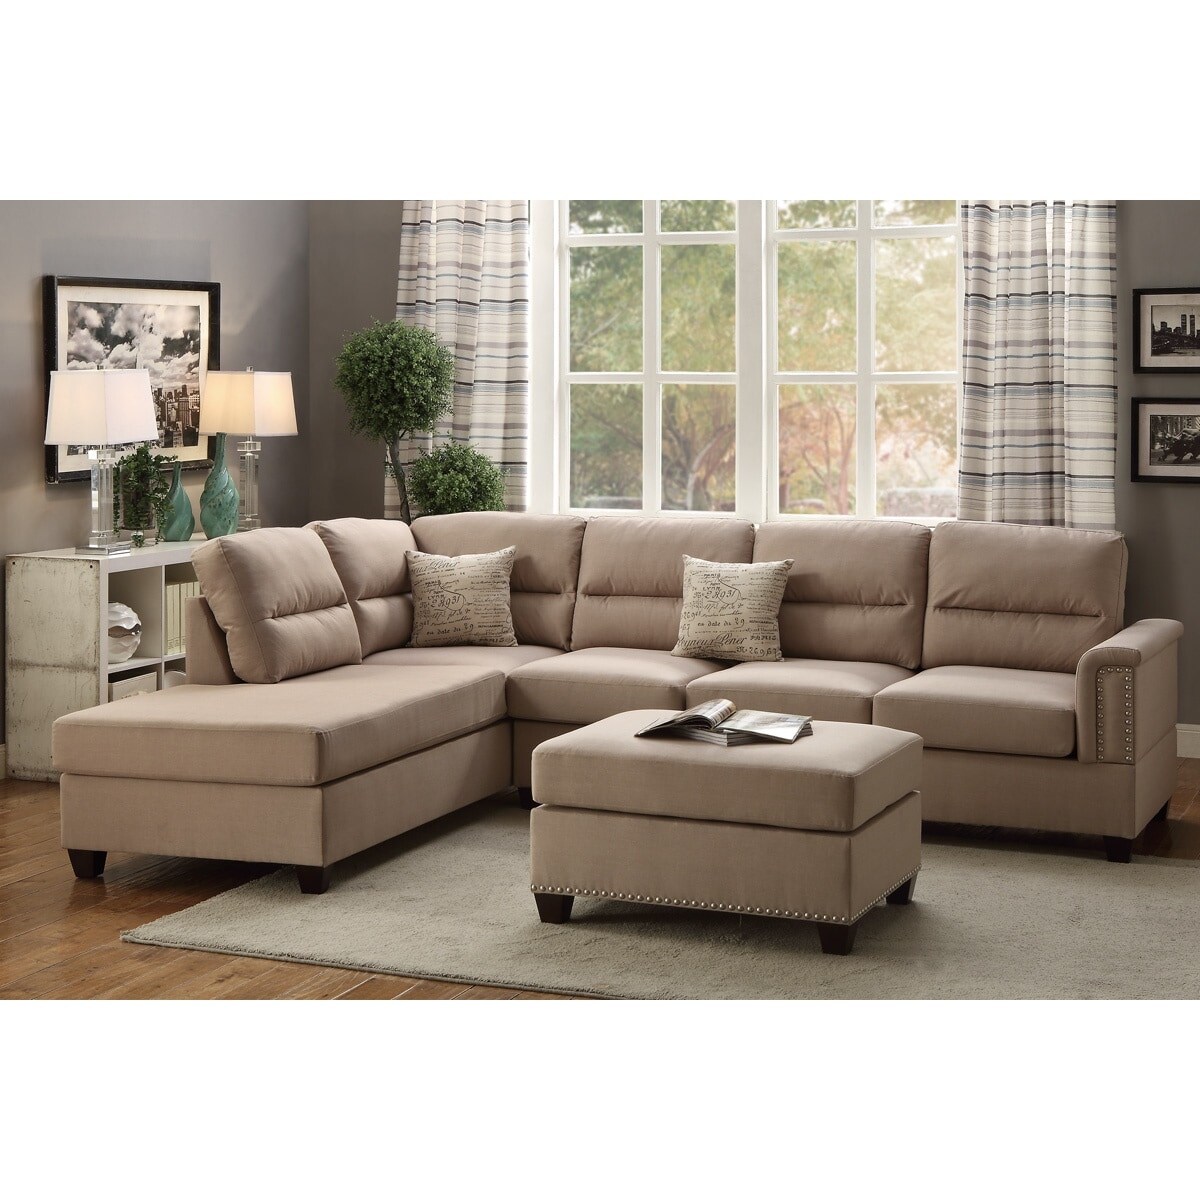 Bobkona Toffy Left Or Right Hand Chaise Sectional With Ottoman Set